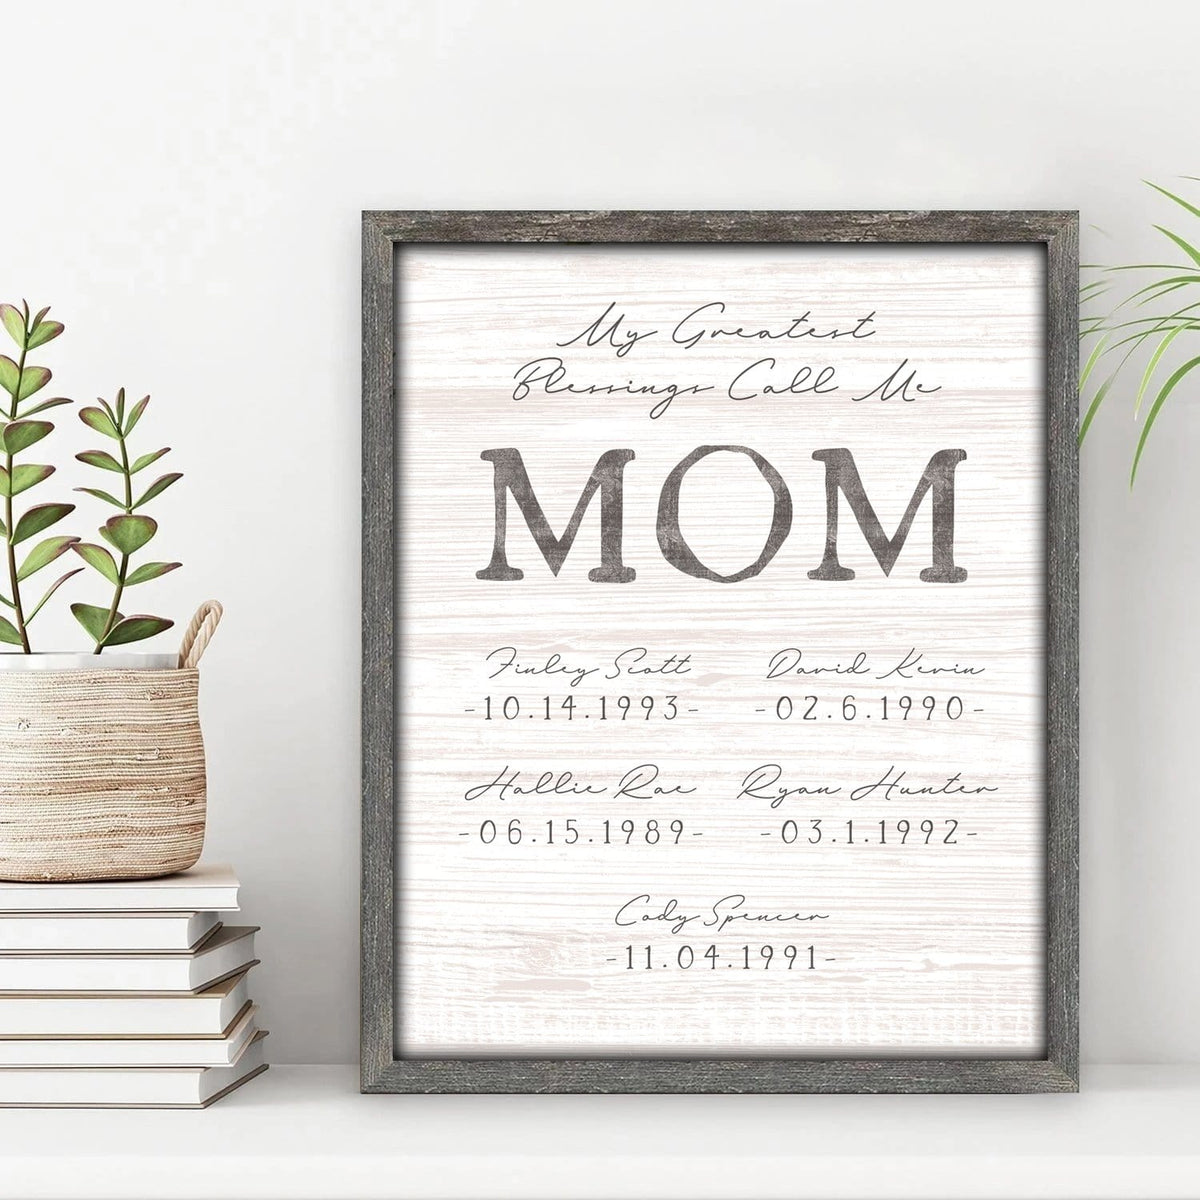 A beautiful personalized gift for mom that will be cherished for a lifetime